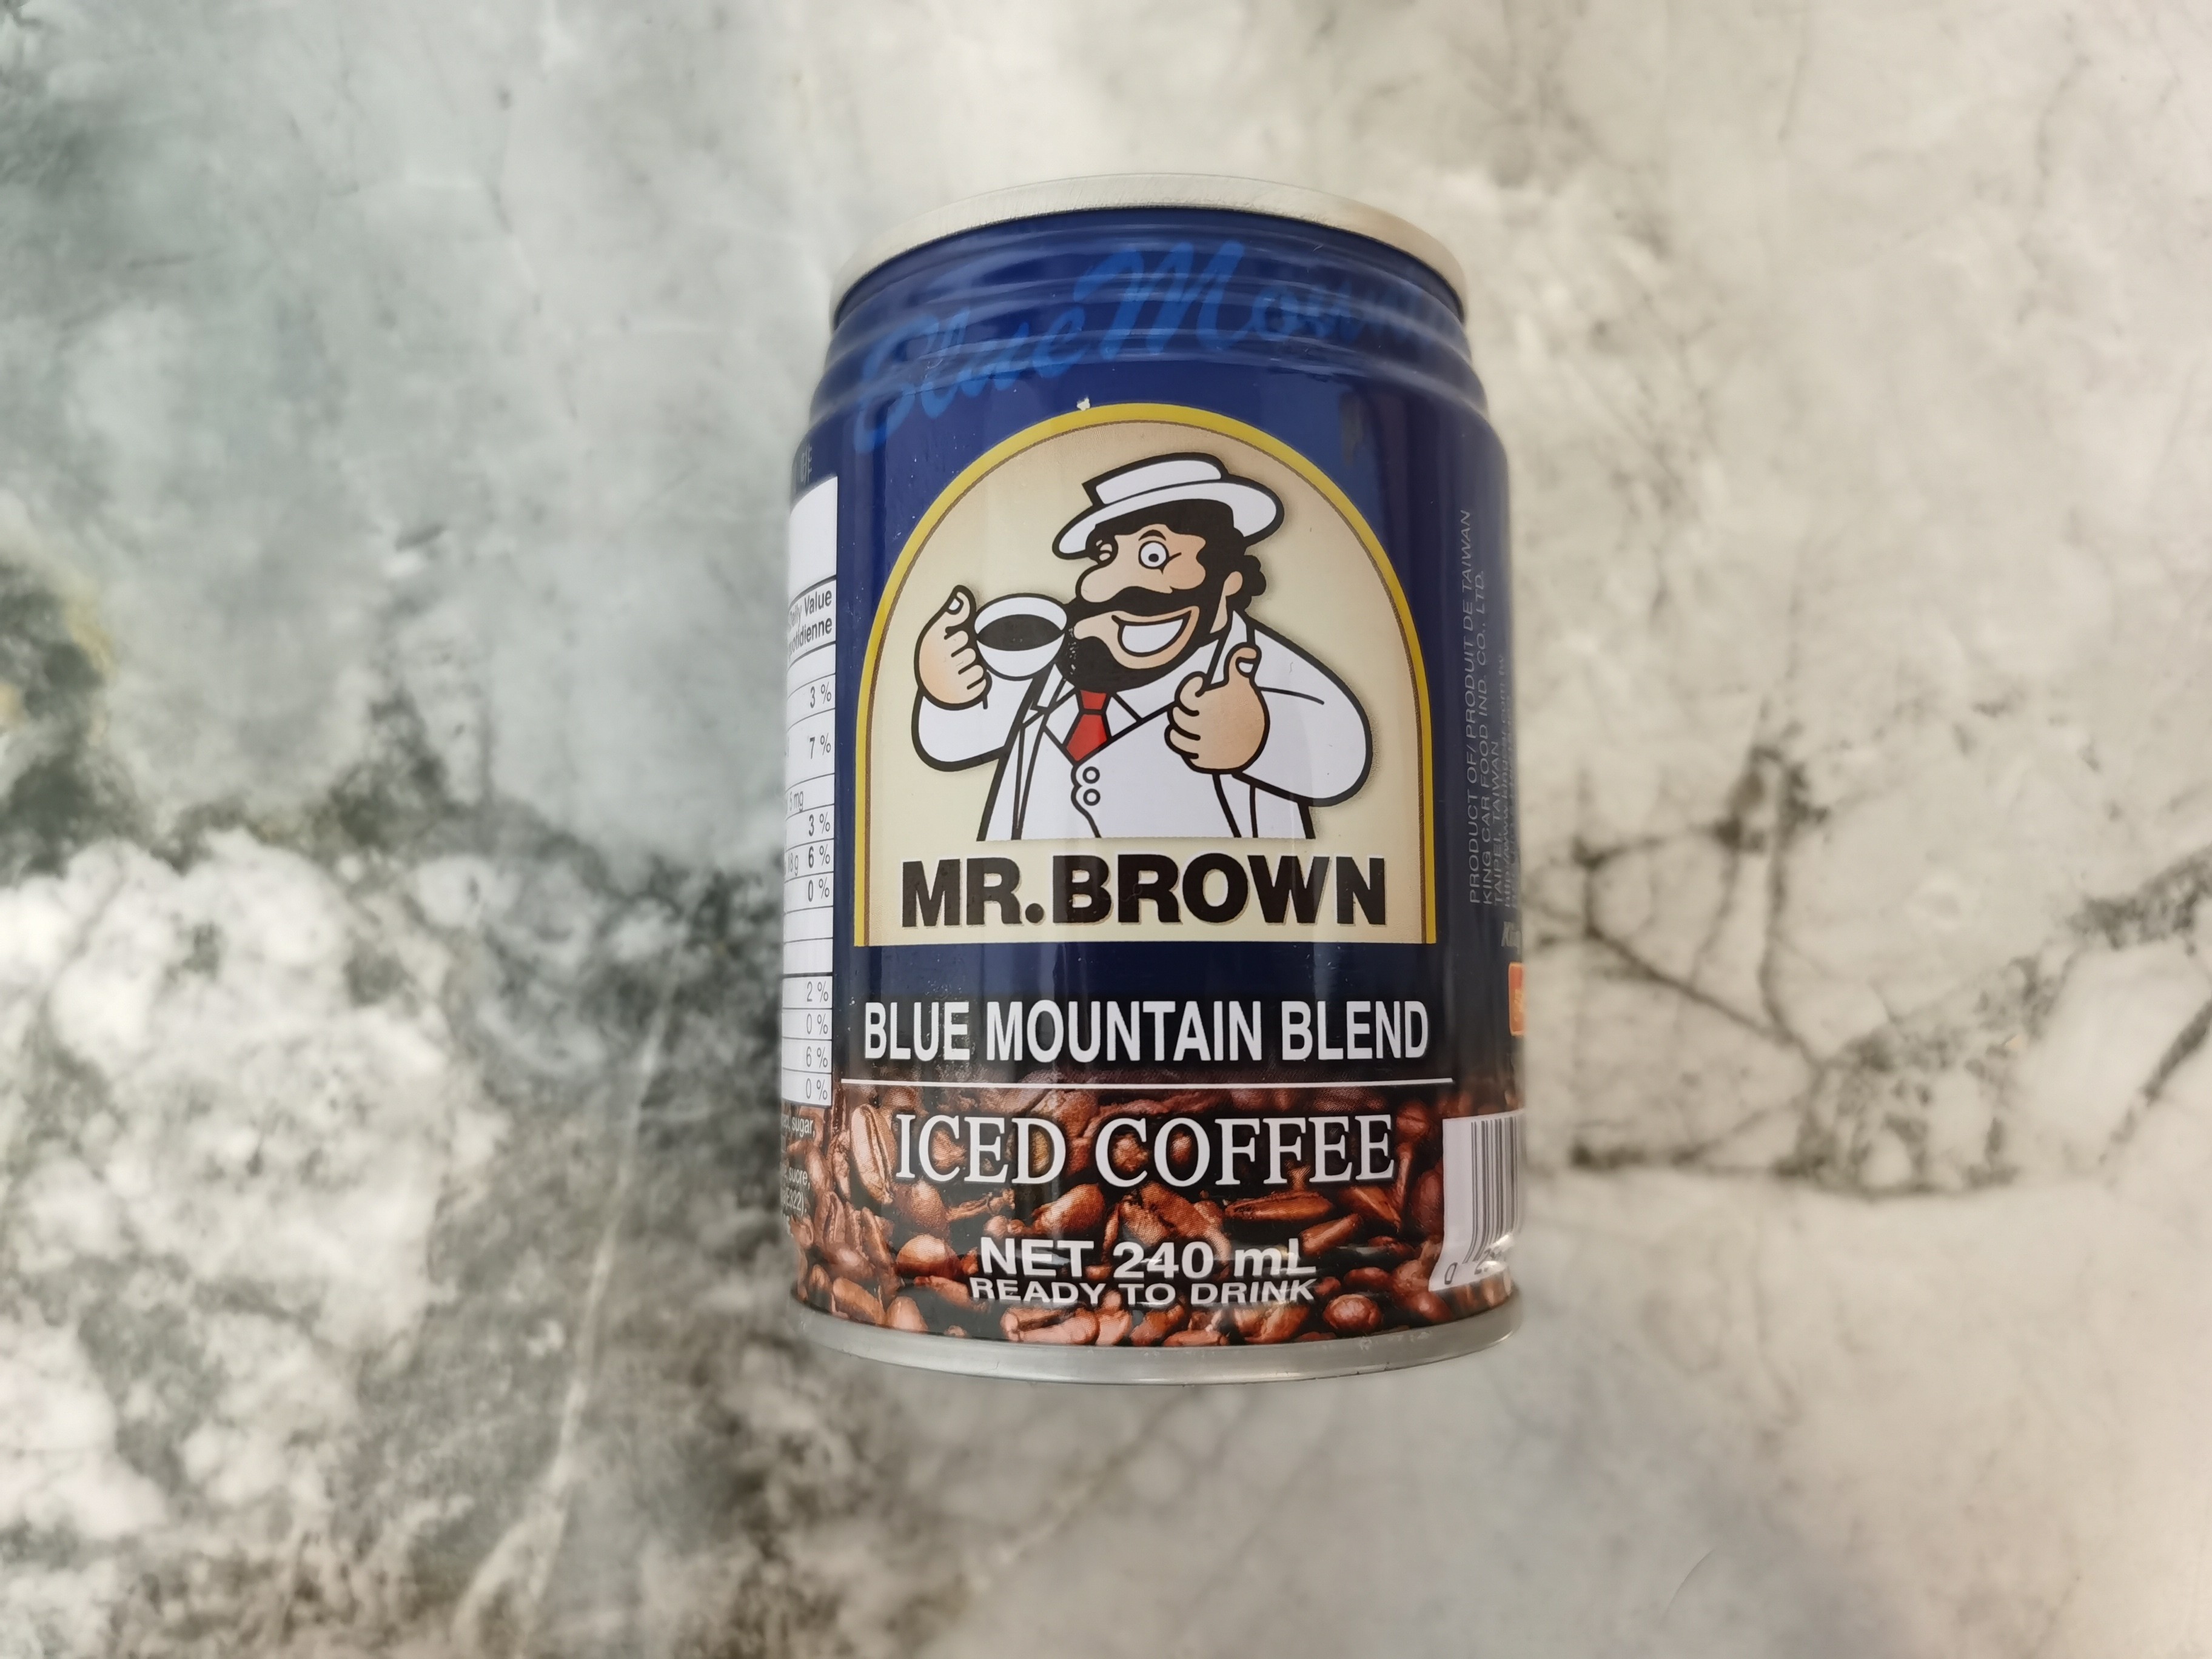 Mr. Brown Blue Mountain Blend Coffee Can on marble background